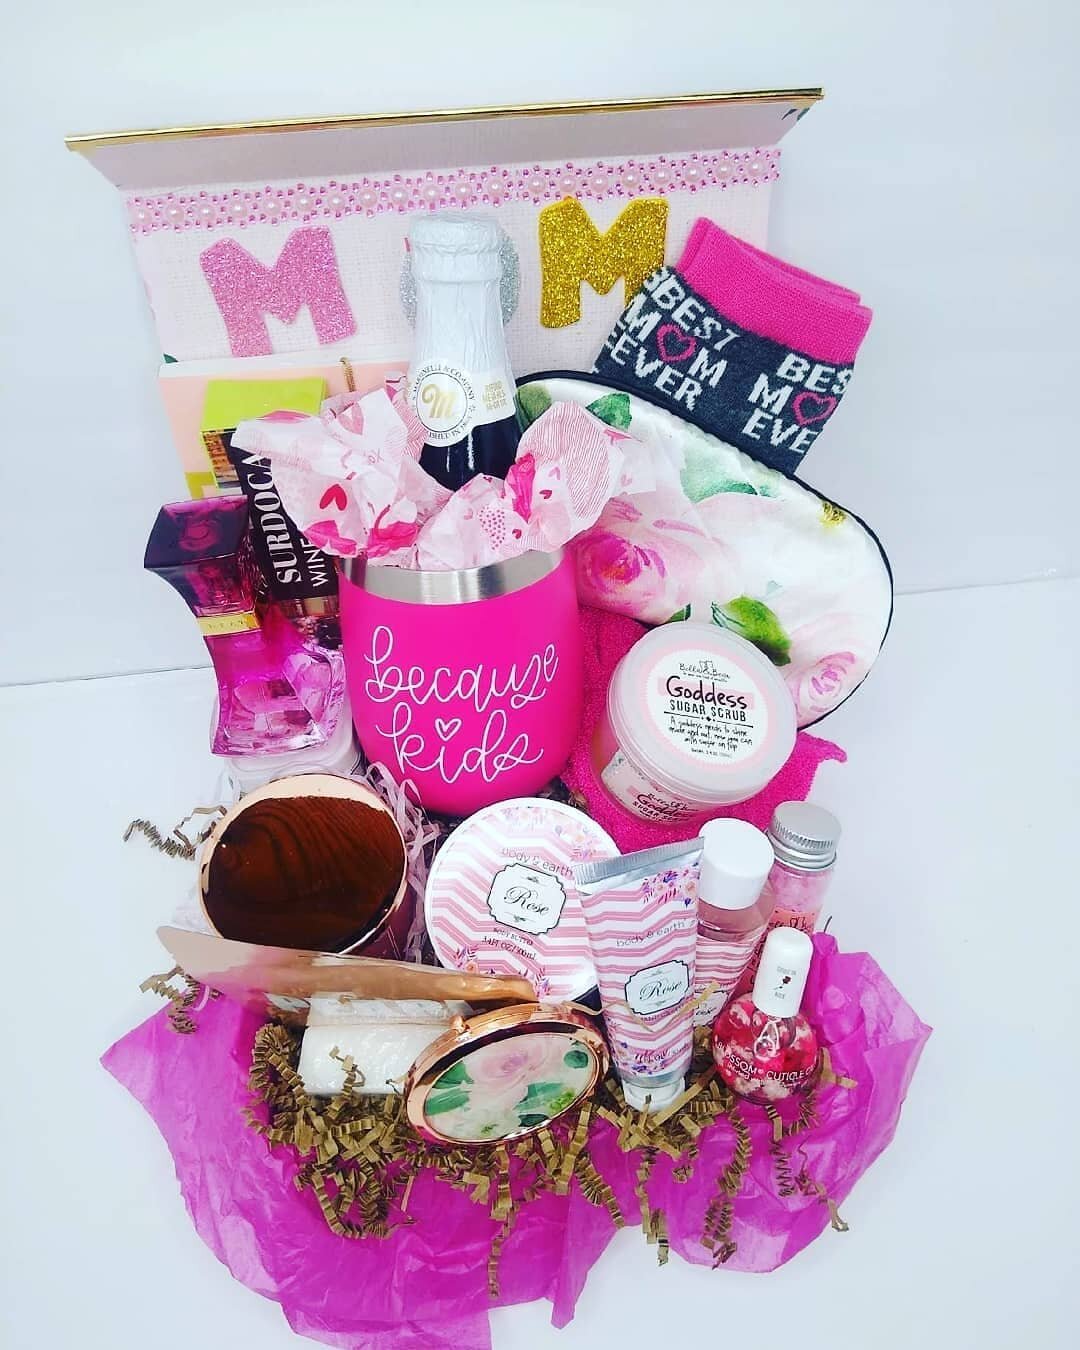 It's that time of year when we &quot;officially&quot; celebrate Mom! 

Sunday May 9th is Mother's Day, shop Kreative Kreations by Kitorah for the perfect customized luxury gift box.

Check out my website by clicking the link in my bio to get started 